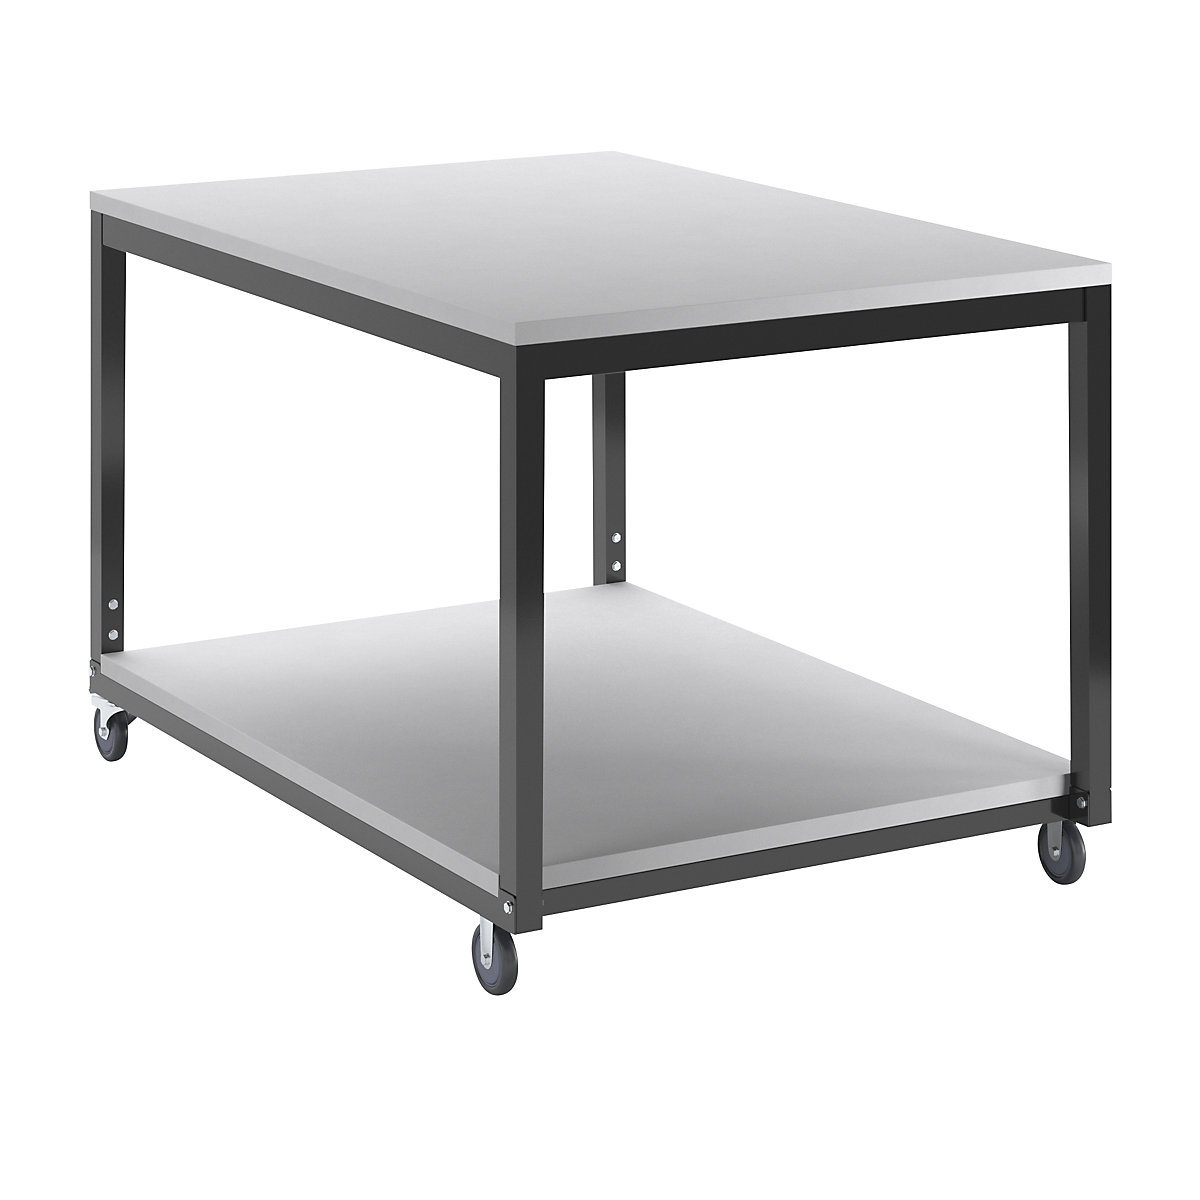 Table trolley with 2 shelves, height adjustable – eurokraft basic, for WT worktable system, LxW 1000 x 700 mm-9